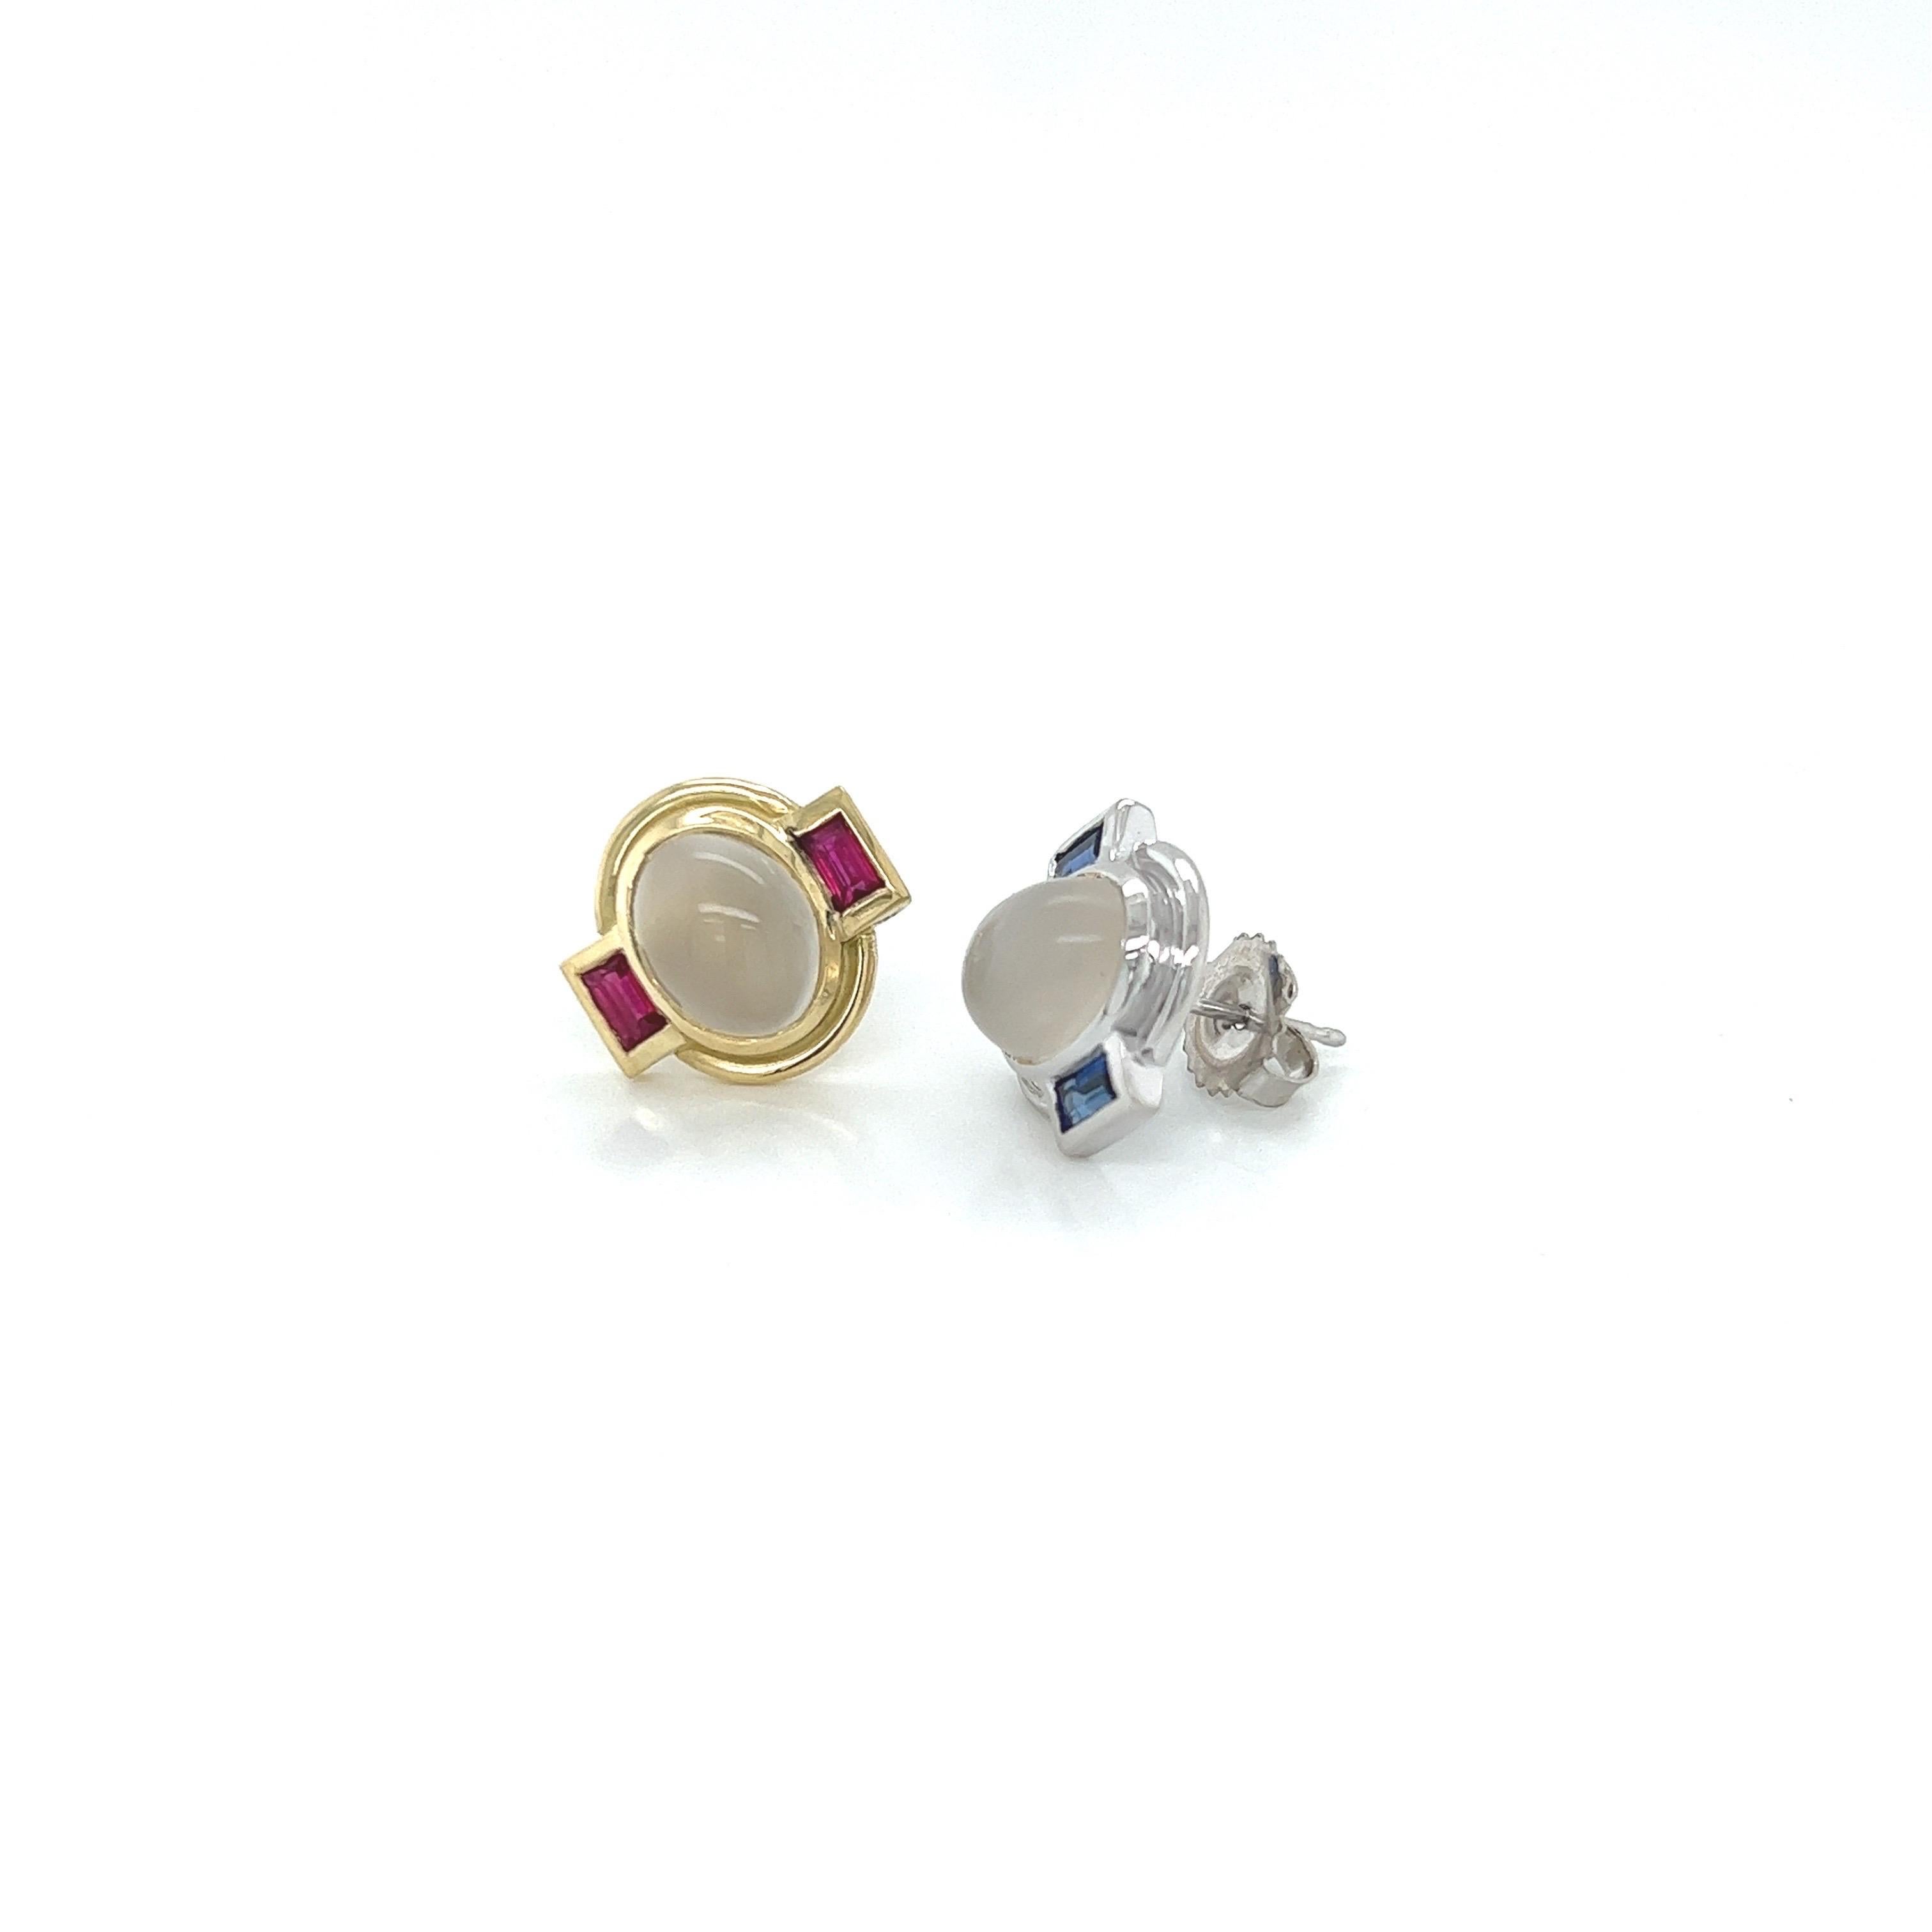 A pair of miss match stud earrings.
One earring is made in 18k yellow gold with cabochon moonstone center and ruby baguettes on the sides. The second earring is made in 18k white gold with moonstone cabochon in the center and sapphire baguettes on